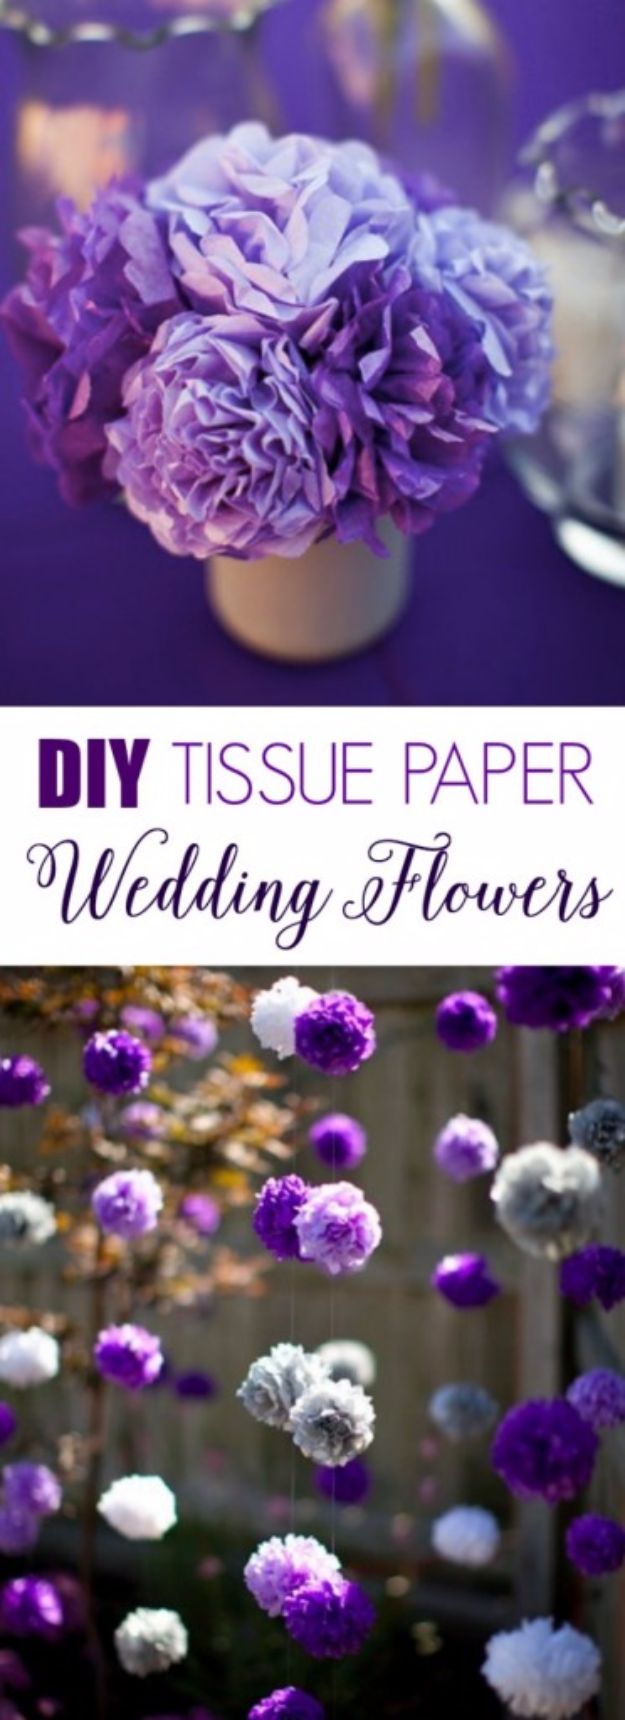 DIY Paper Flowers - DIY Tissue Paper Flowers - How To Make A Paper Flower - Large Wedding Backdrop for Wall Decor - Easy Tissue Paper Flower Tutorial for Kids - Giant Projects for Photo Backdrops - Daisy, Roses, Bouquets, Centerpieces - Cricut Template and Step by Step Tutorial 